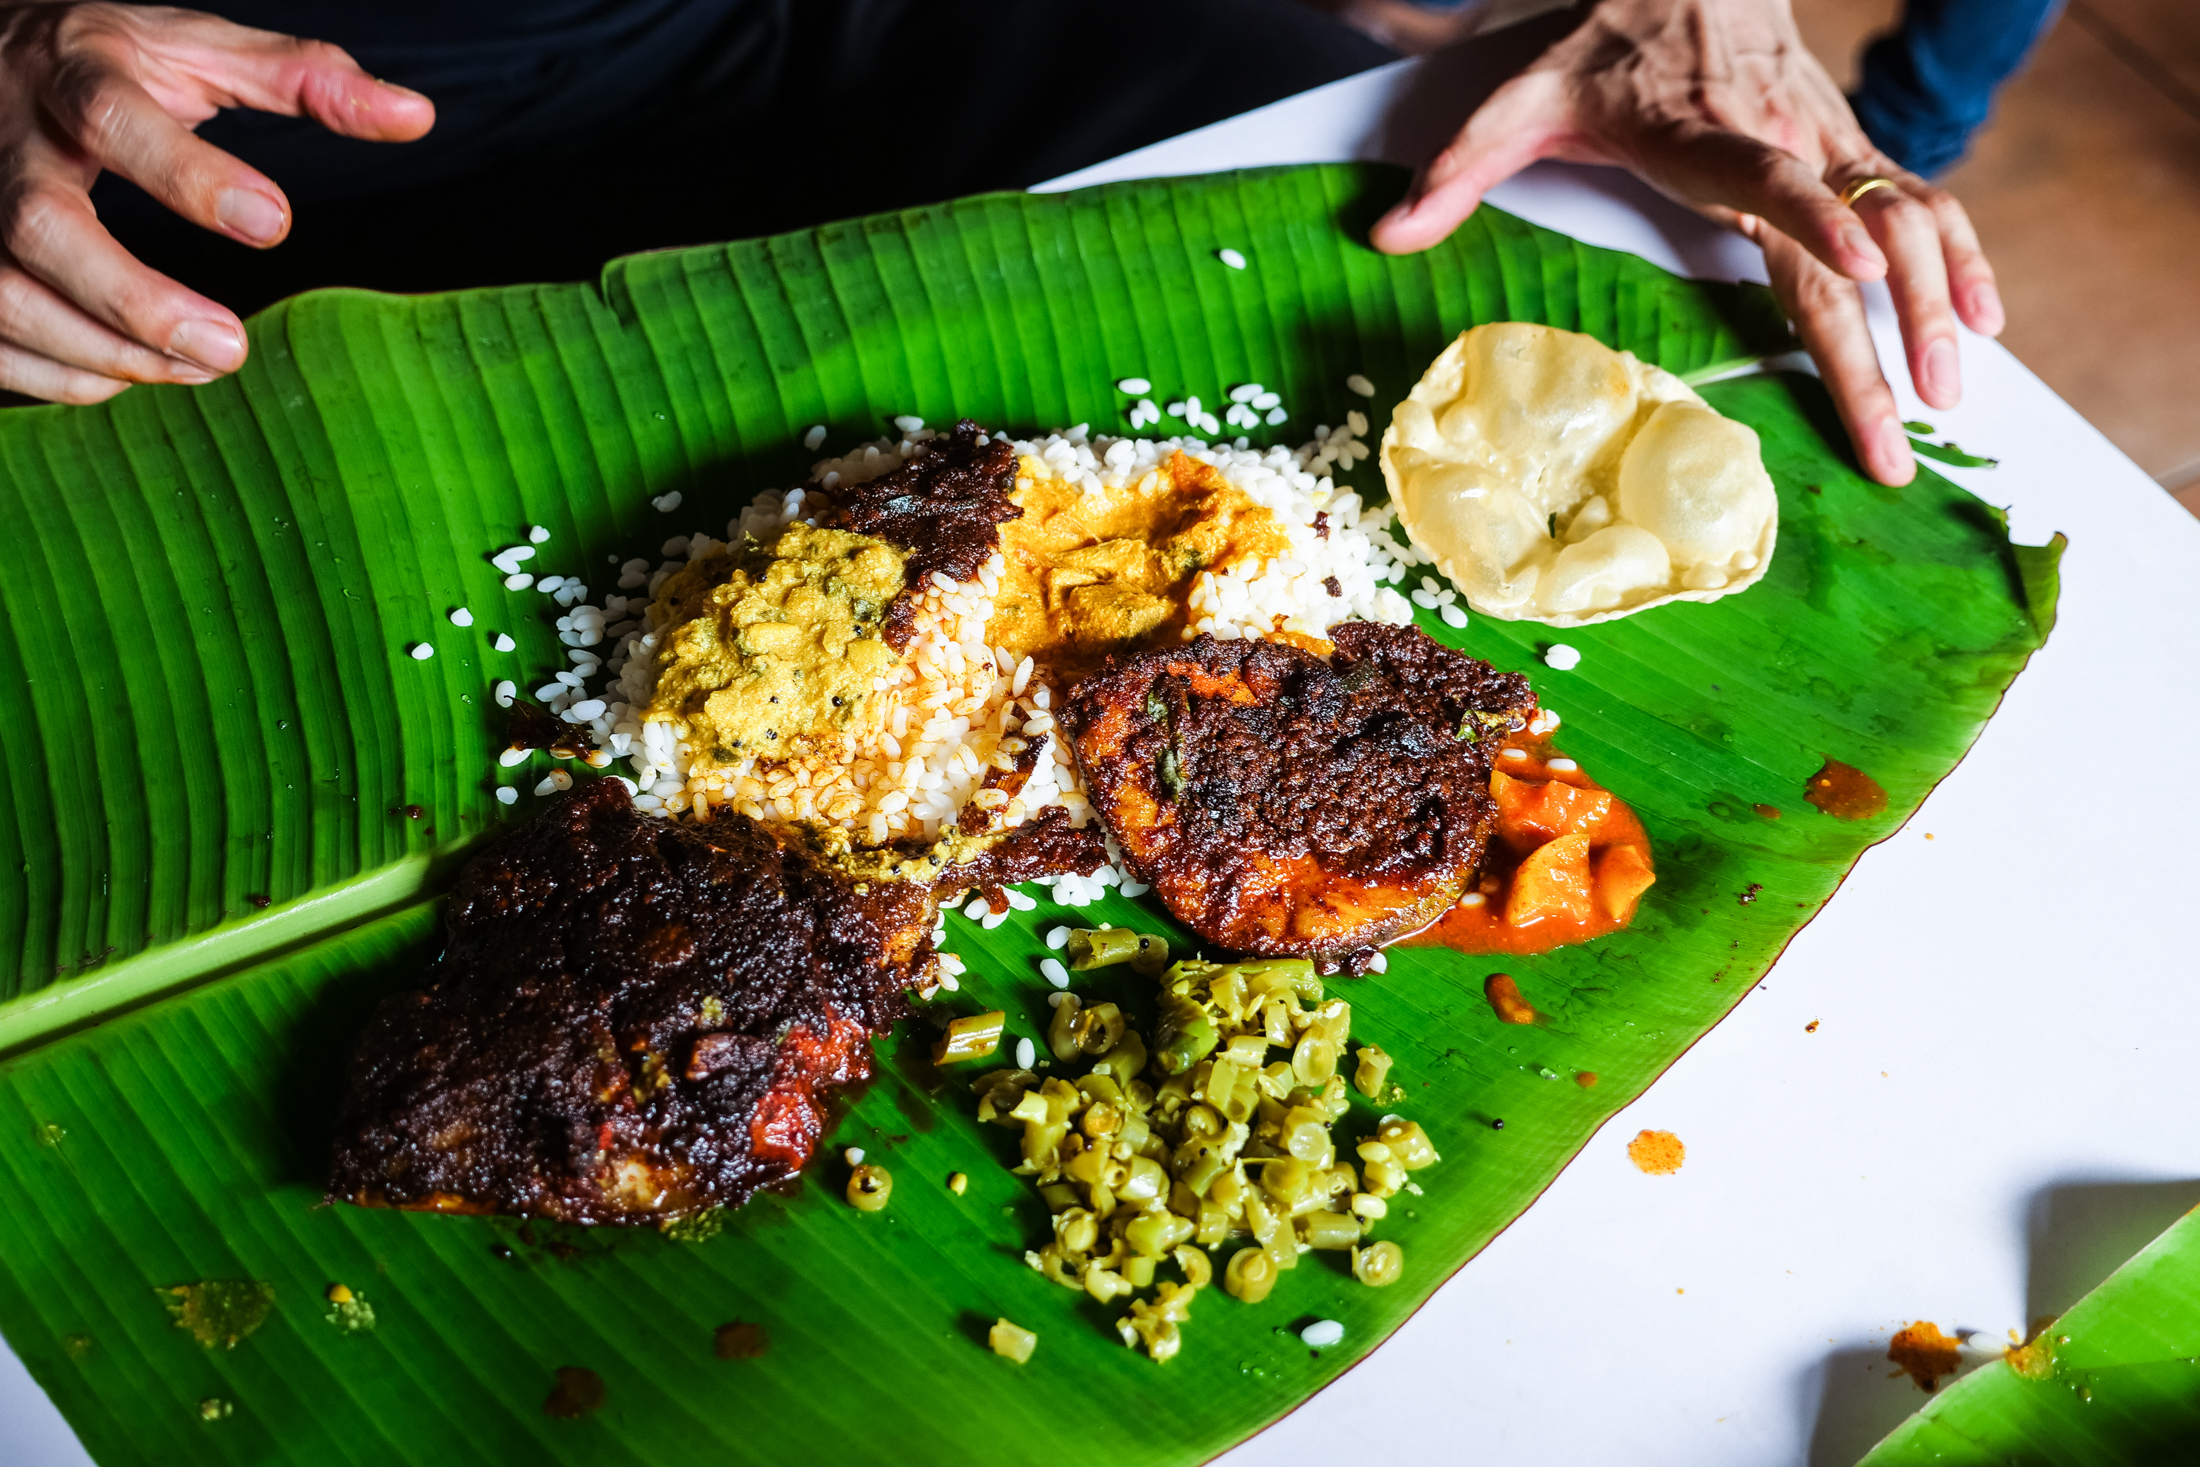 In Kerala, eat India's Most Amazing Curry Fish Fry (at 'Amma Hotel' Seafood)